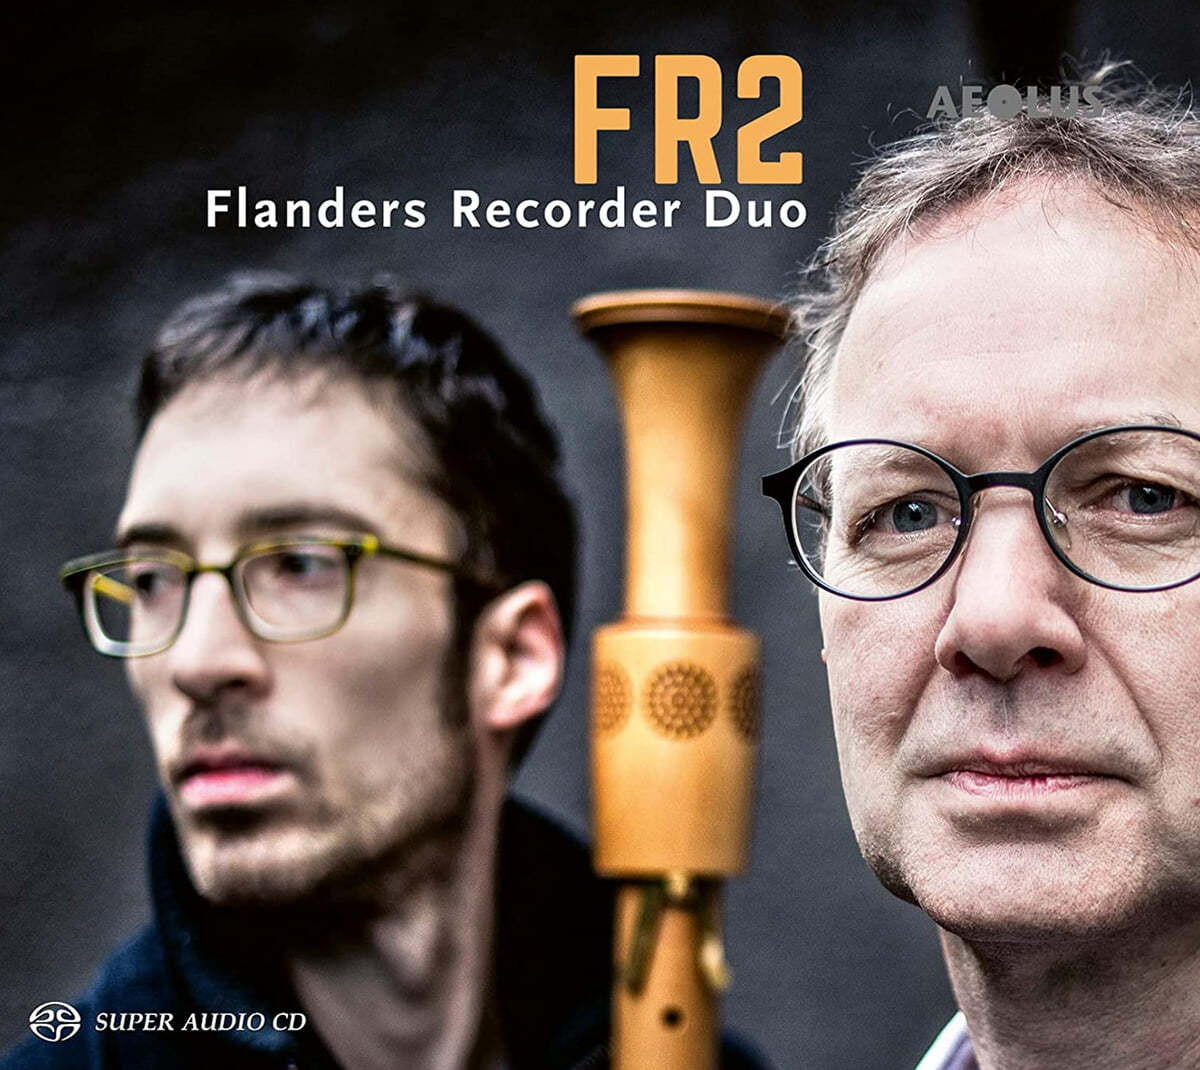 FR2 (Flanders Recorder Duo) 리코더 이중주를 위한 음악 (Music for Recorder Duo)